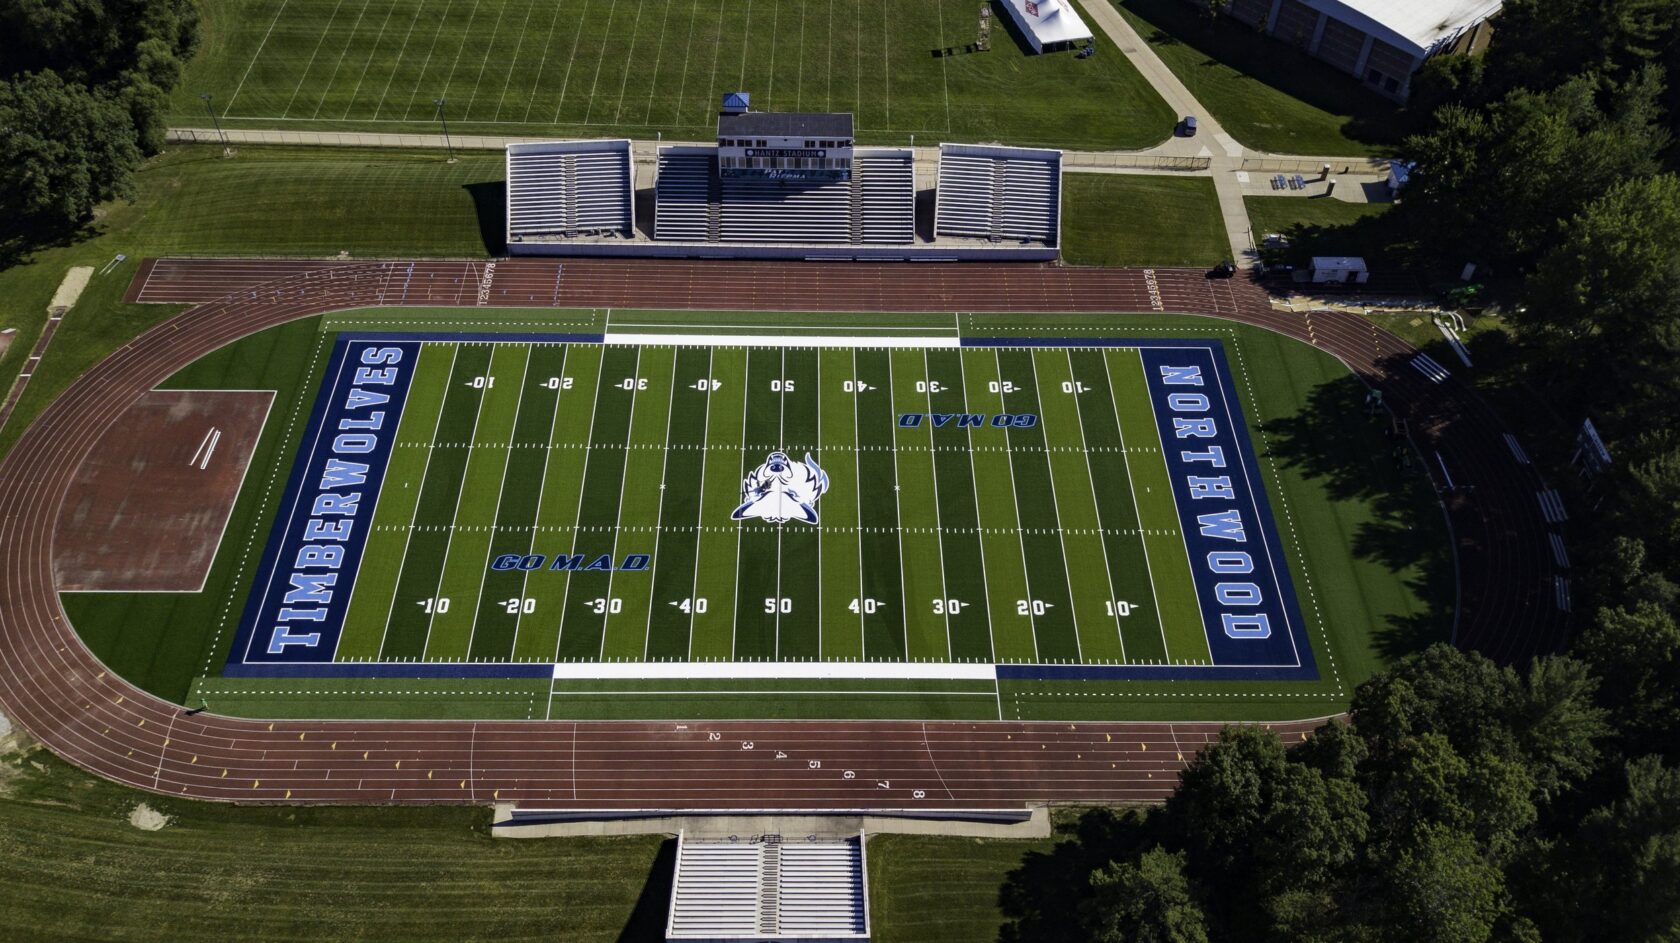 Gearing up for 2022 Northwood University